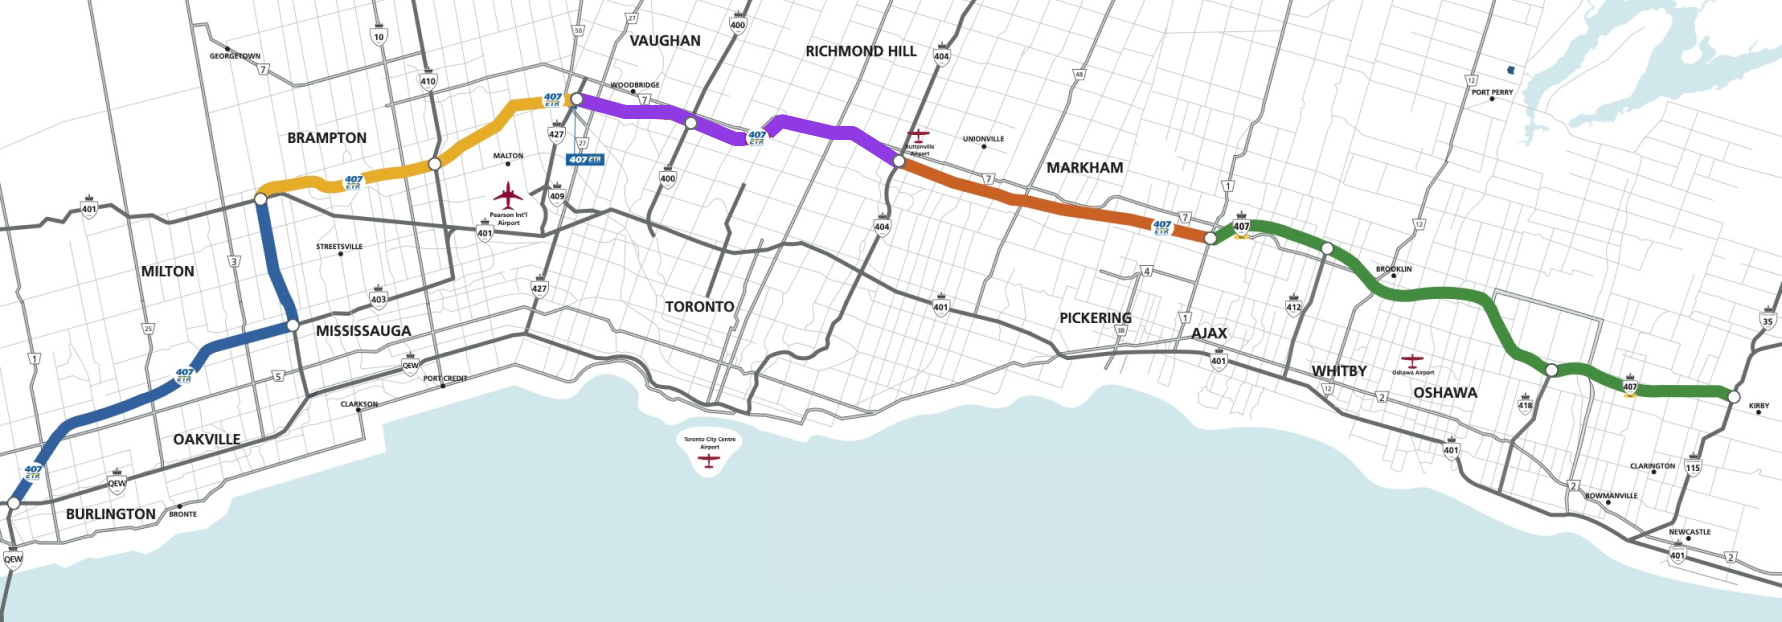 A map of Highway 407 ETR and Highway 407, with Highway 407 starting from Regional Road 1 to Highway 115.